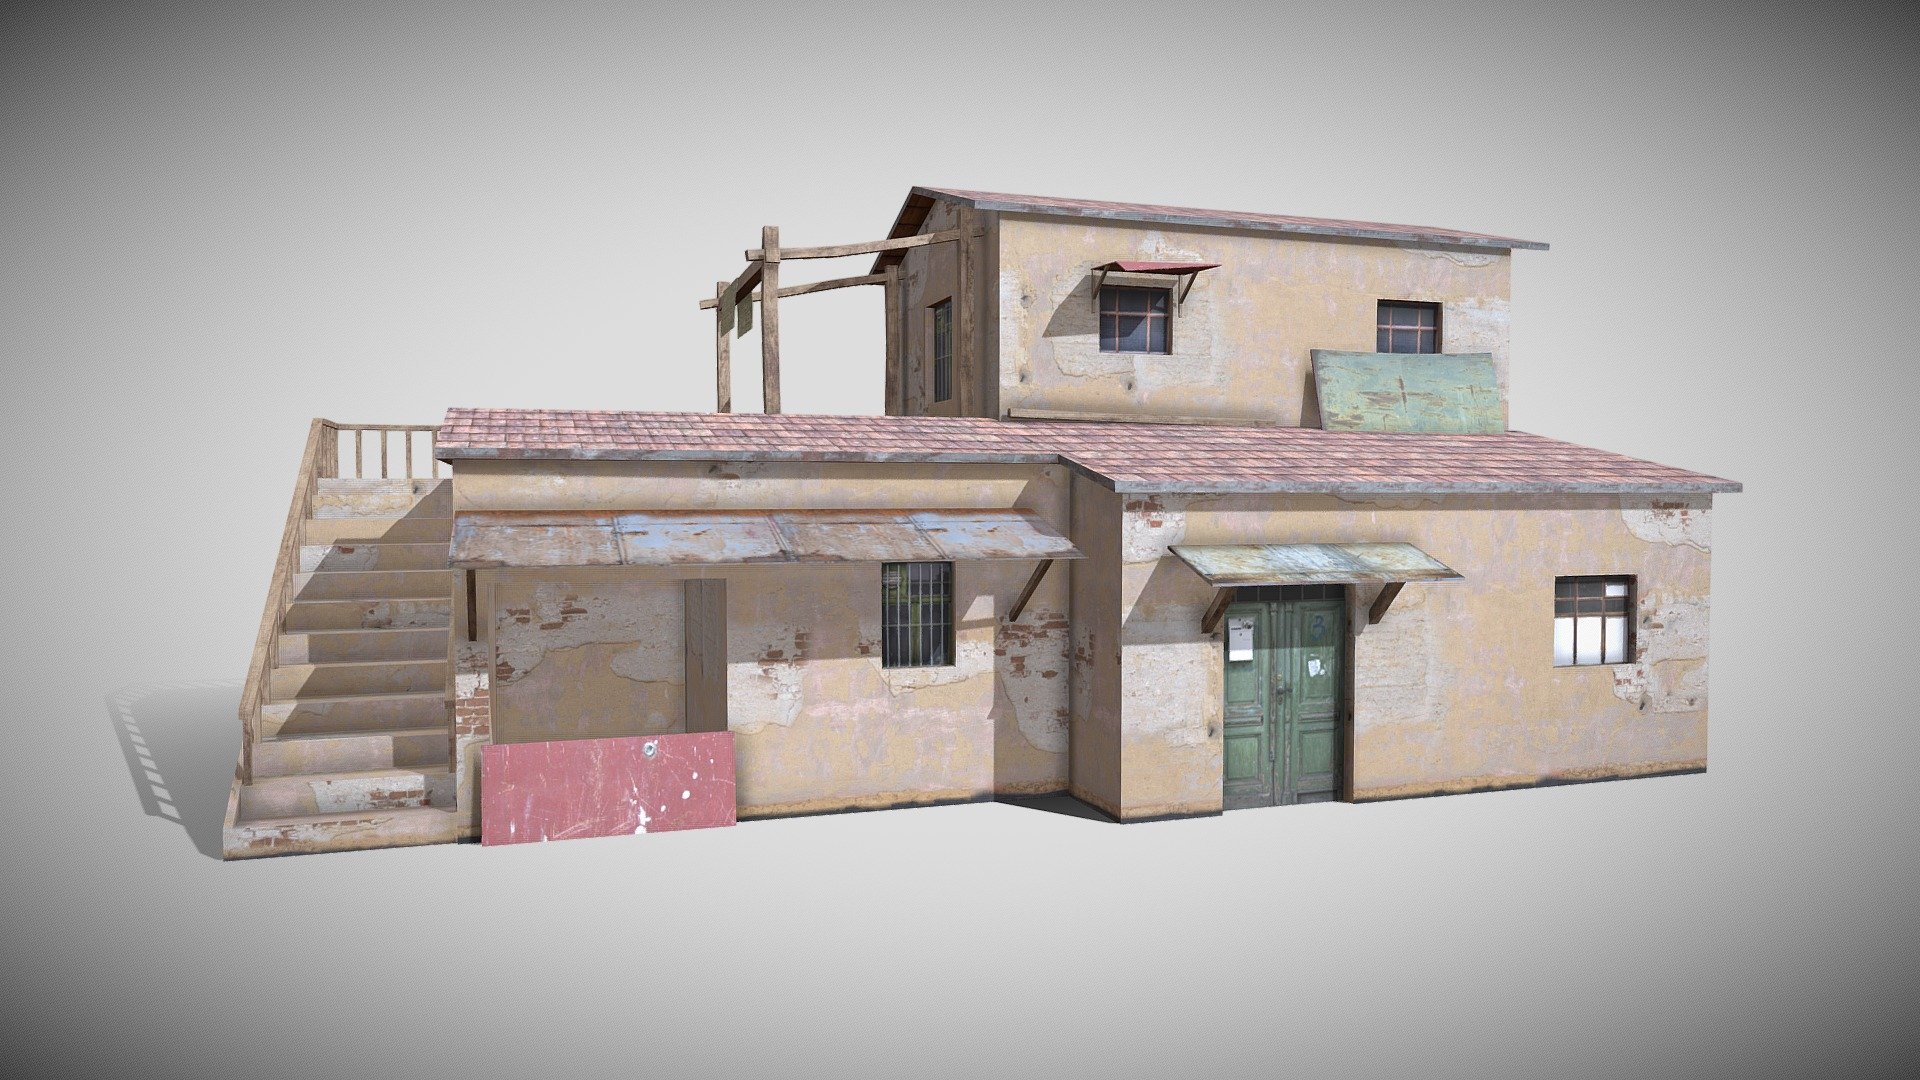 Game Ready 3D Old House /slum Native file format 3Ds max 2022 Other formats Blender 4.0 ,FBX, OBJ, All formats include materials &amp; textures

Polygons- 806   Vertices-978

Materials &amp; textures. 1 Diffuse Map 2048x2048 - Slum X11 - Buy Royalty Free 3D model by 3DRK (@3DRK98) 3d model